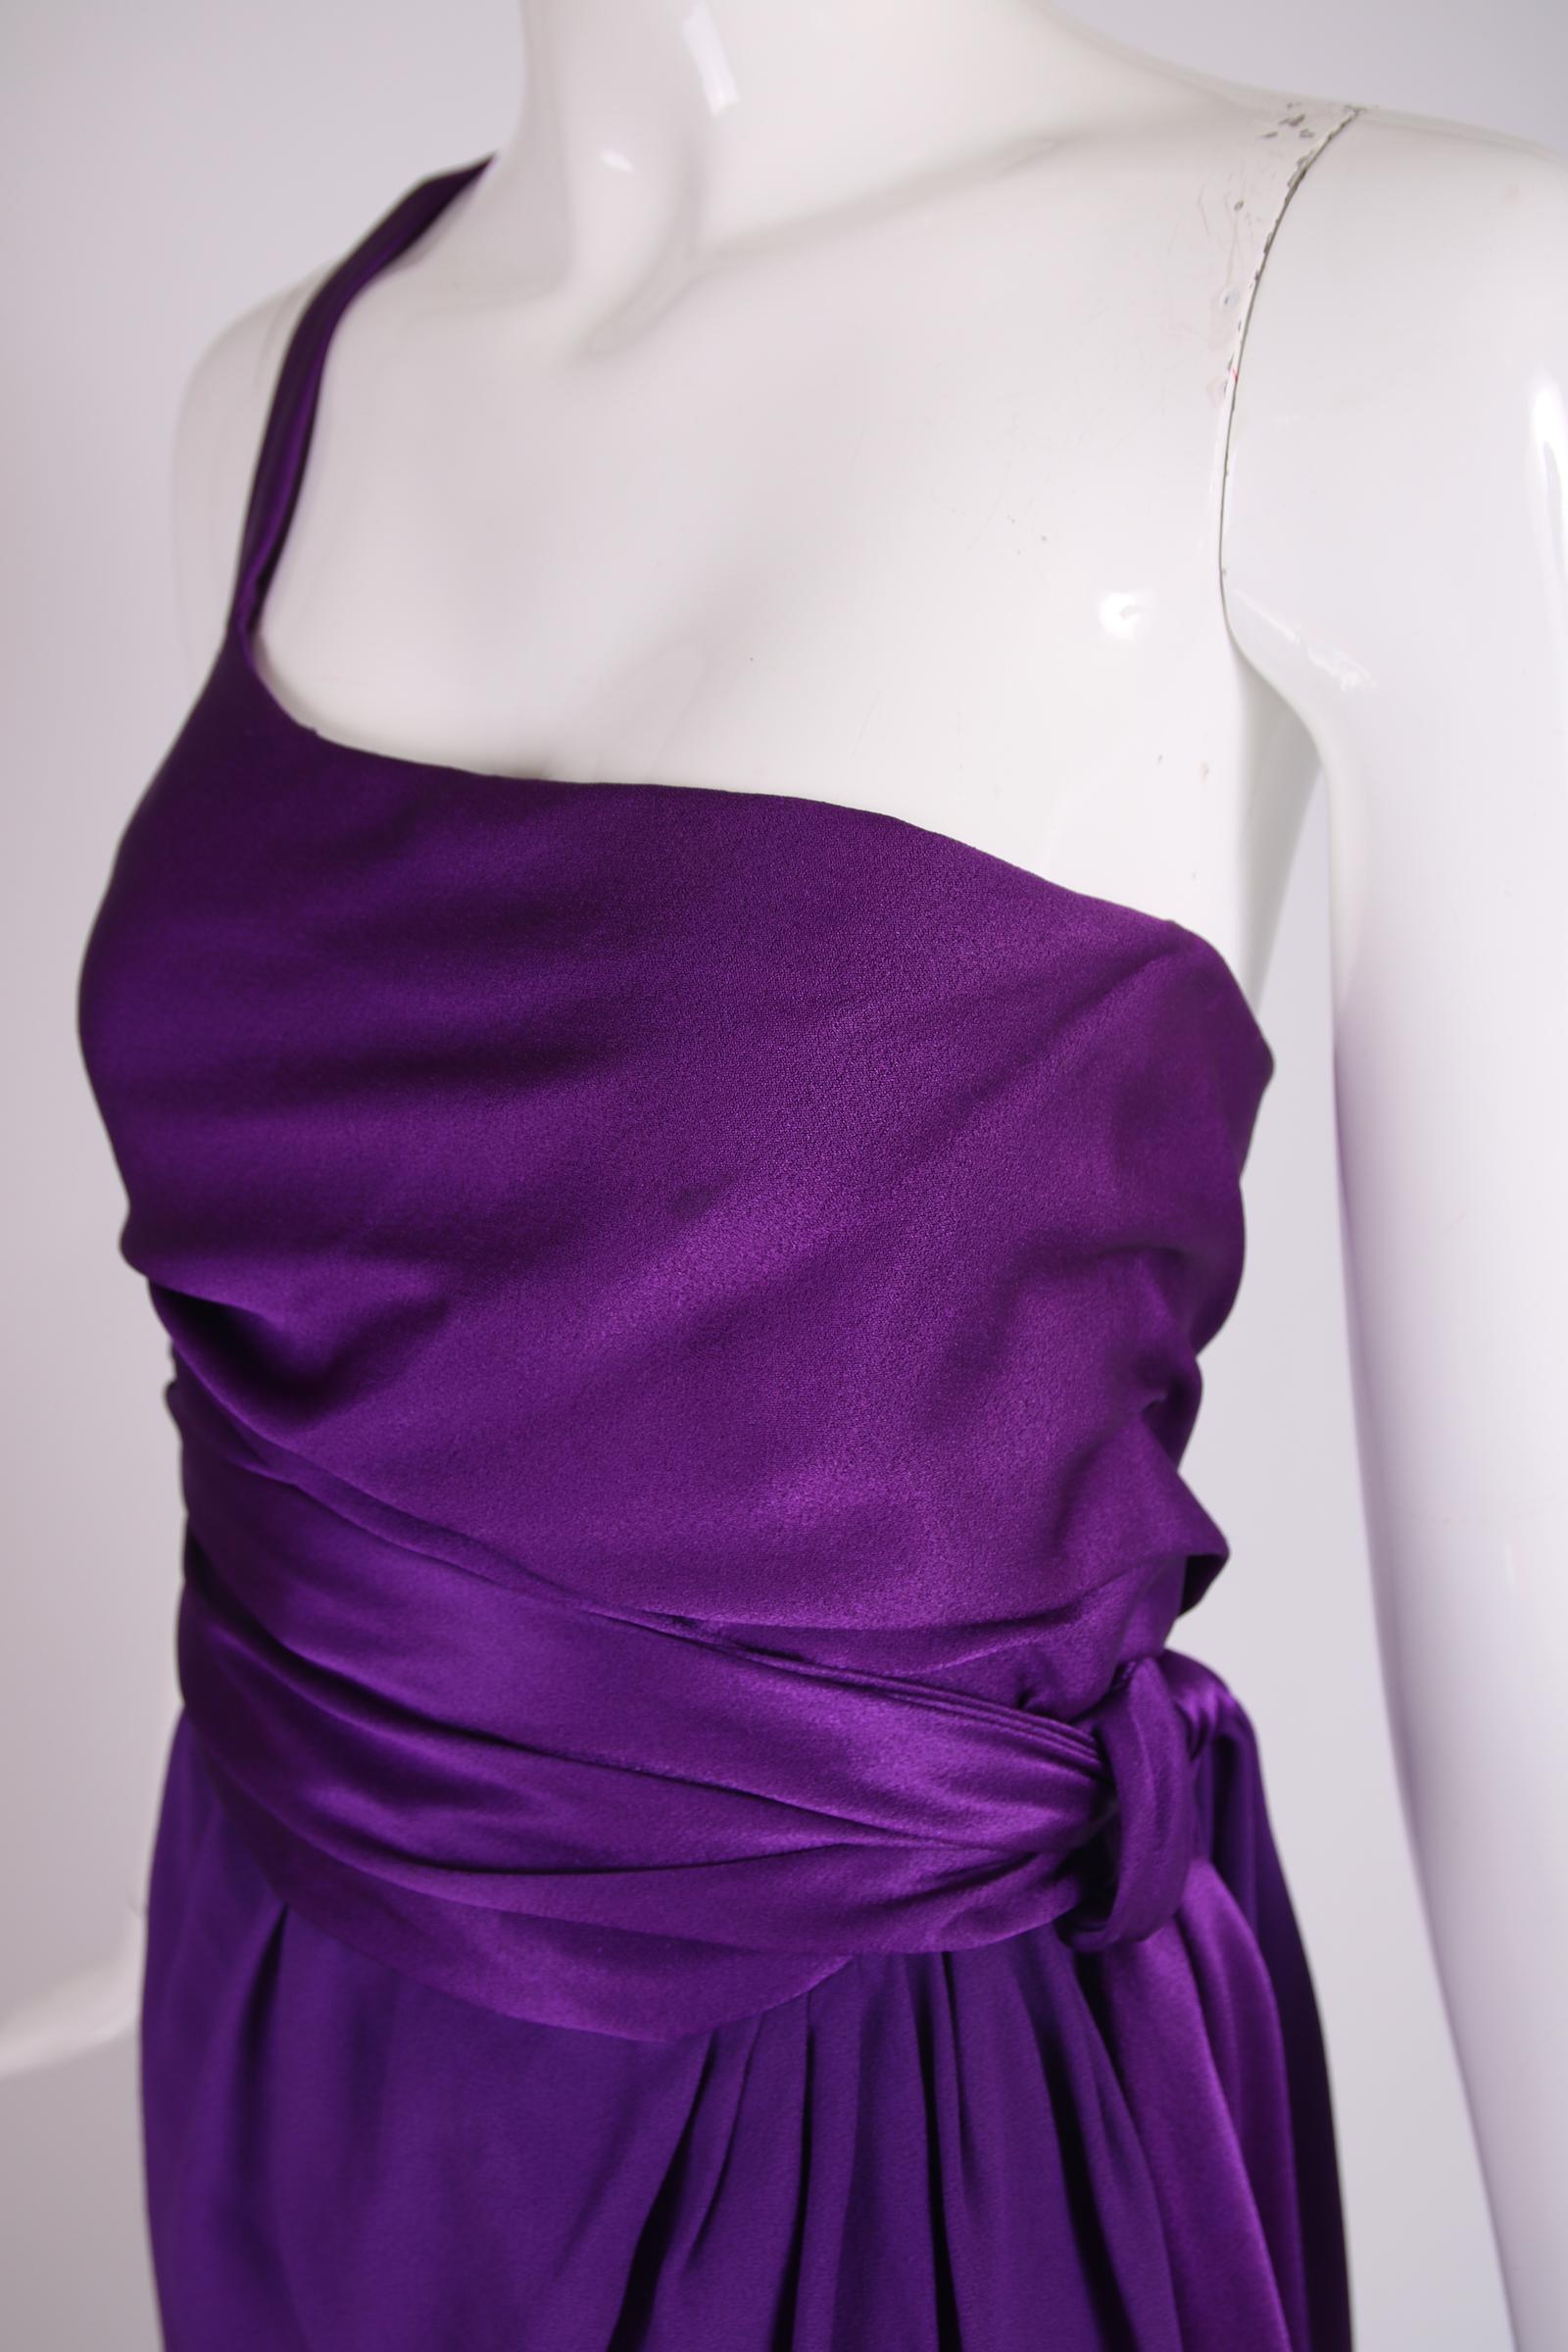 1970's Halston purple silk evening gown with a single shoulder strap and wrap skirt featuring a draped waist tie. The silk fabric which the bodice and waist tie are fabricated from is shiny silk satin while the skirt fabric is either a silk crepe de